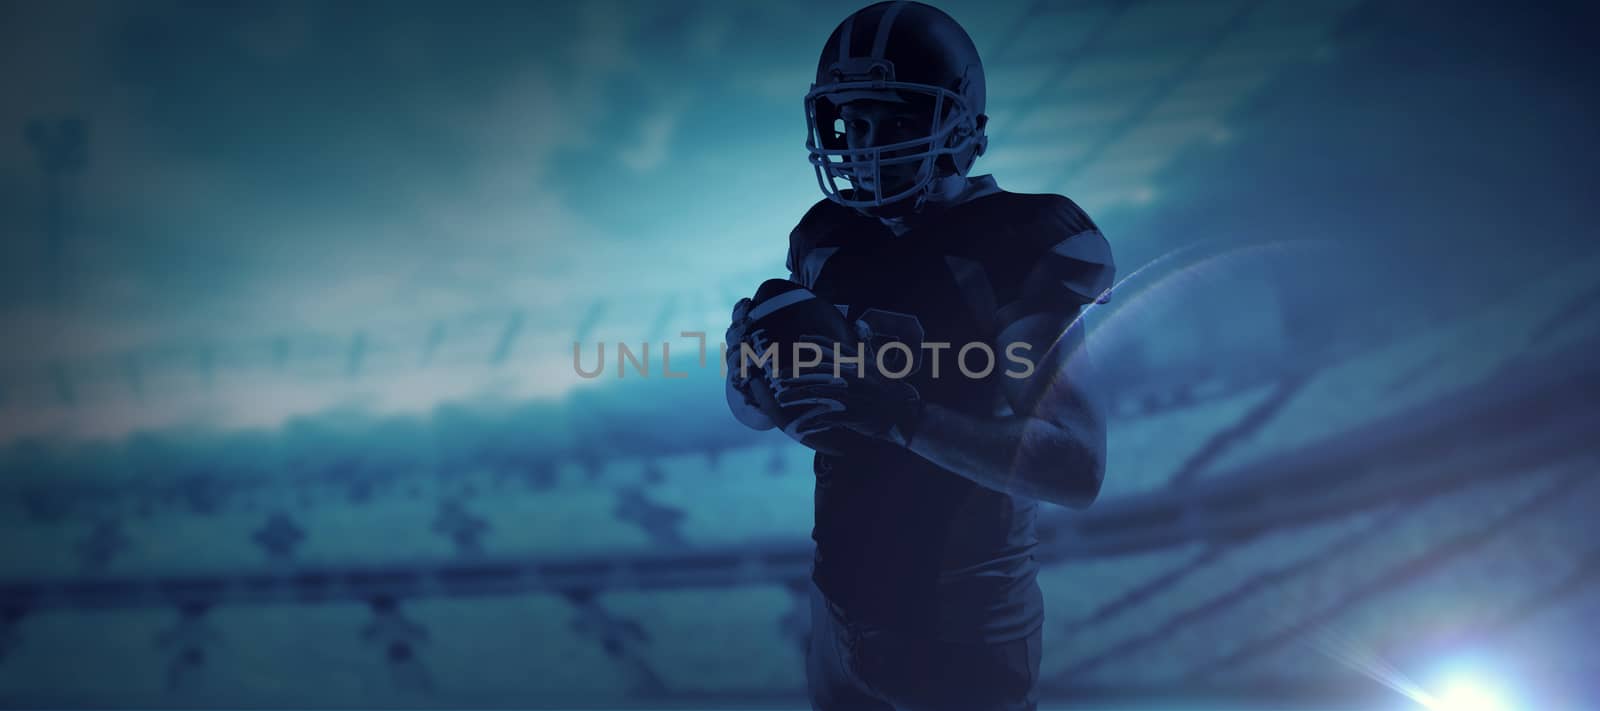 Composite image of american football player in helmet holding rugby ball by Wavebreakmedia